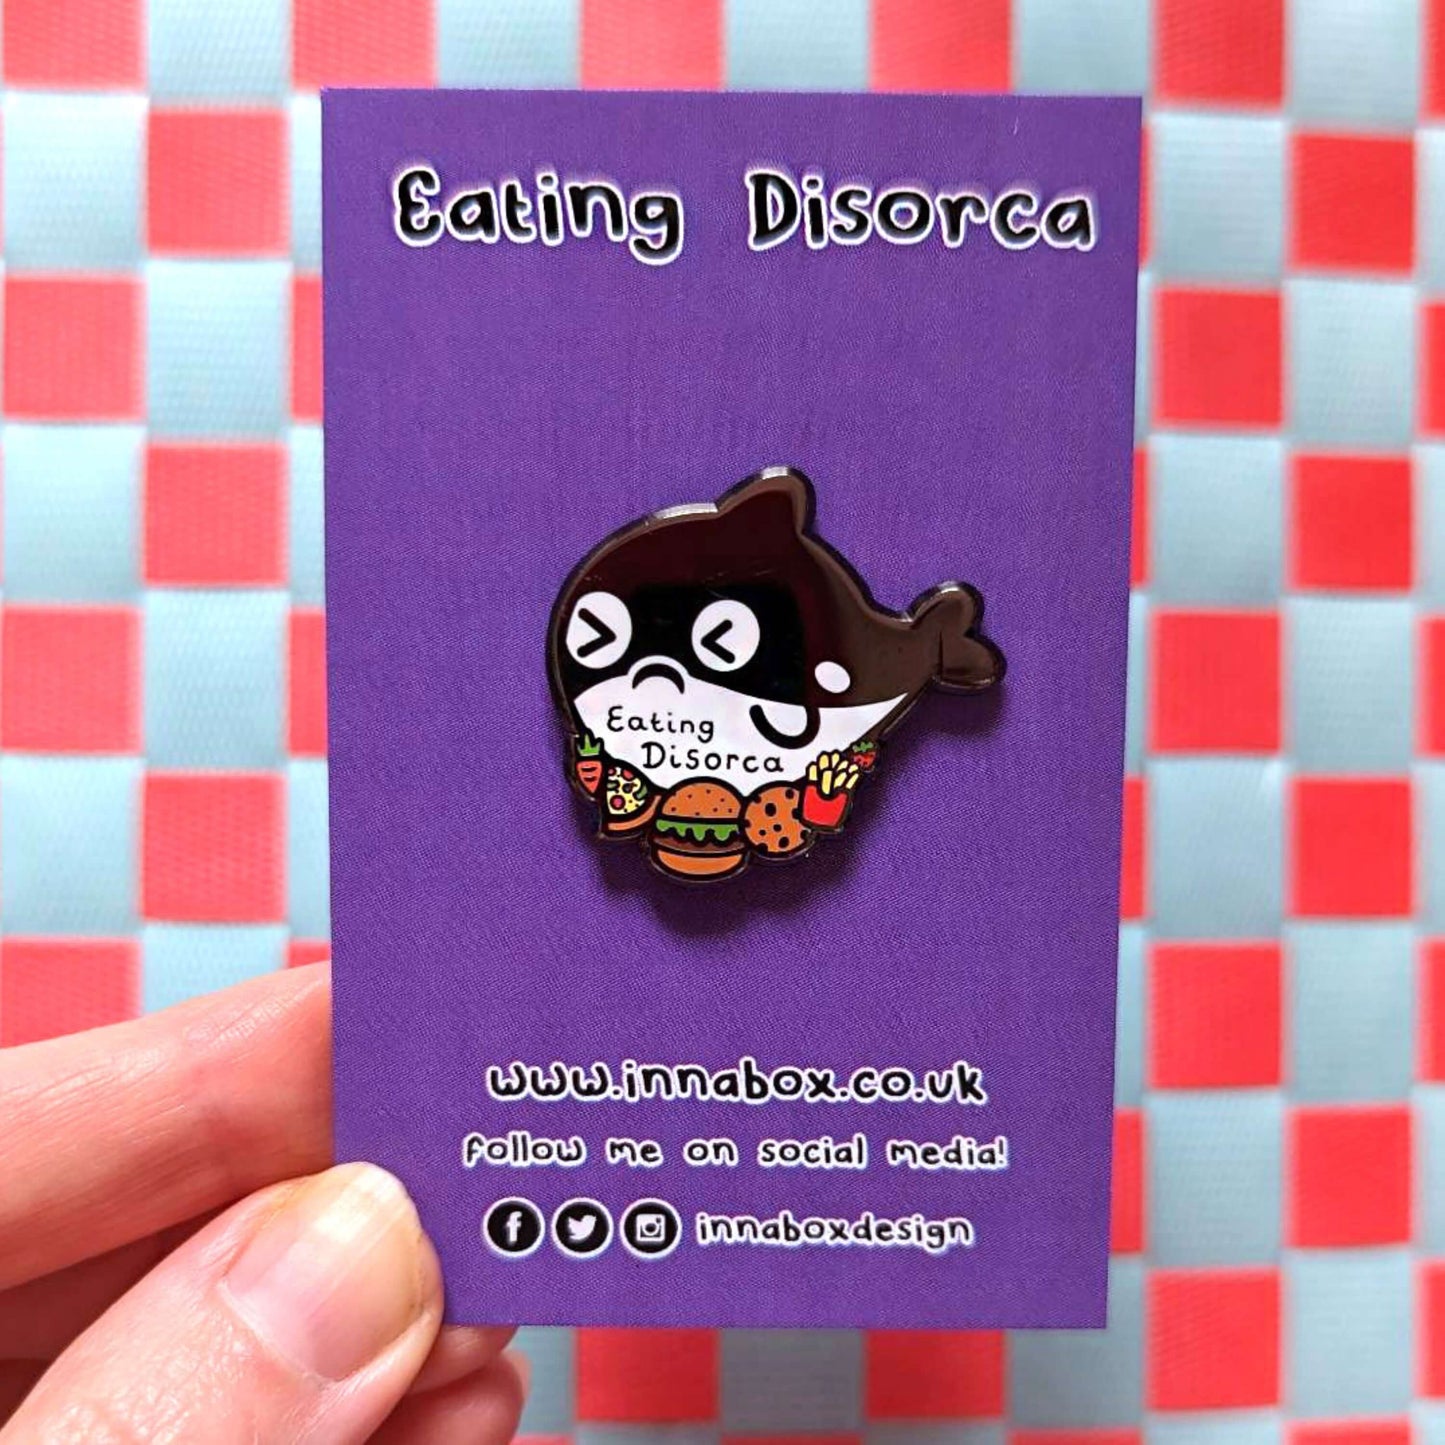 The Eating Disorca Orca Whale Enamel Pin - Eating Disorder on purple backing card with 'eating disorca' written above in black and innabox website and social media handles below, held over a red and white background. The black orca whale shaped enamel pin has a stressed expression whilst surrounded by burgers, pizzas, cookies, fries and fruit with 'eating discorca' across its middle. The design is raising awareness for eating disorders.